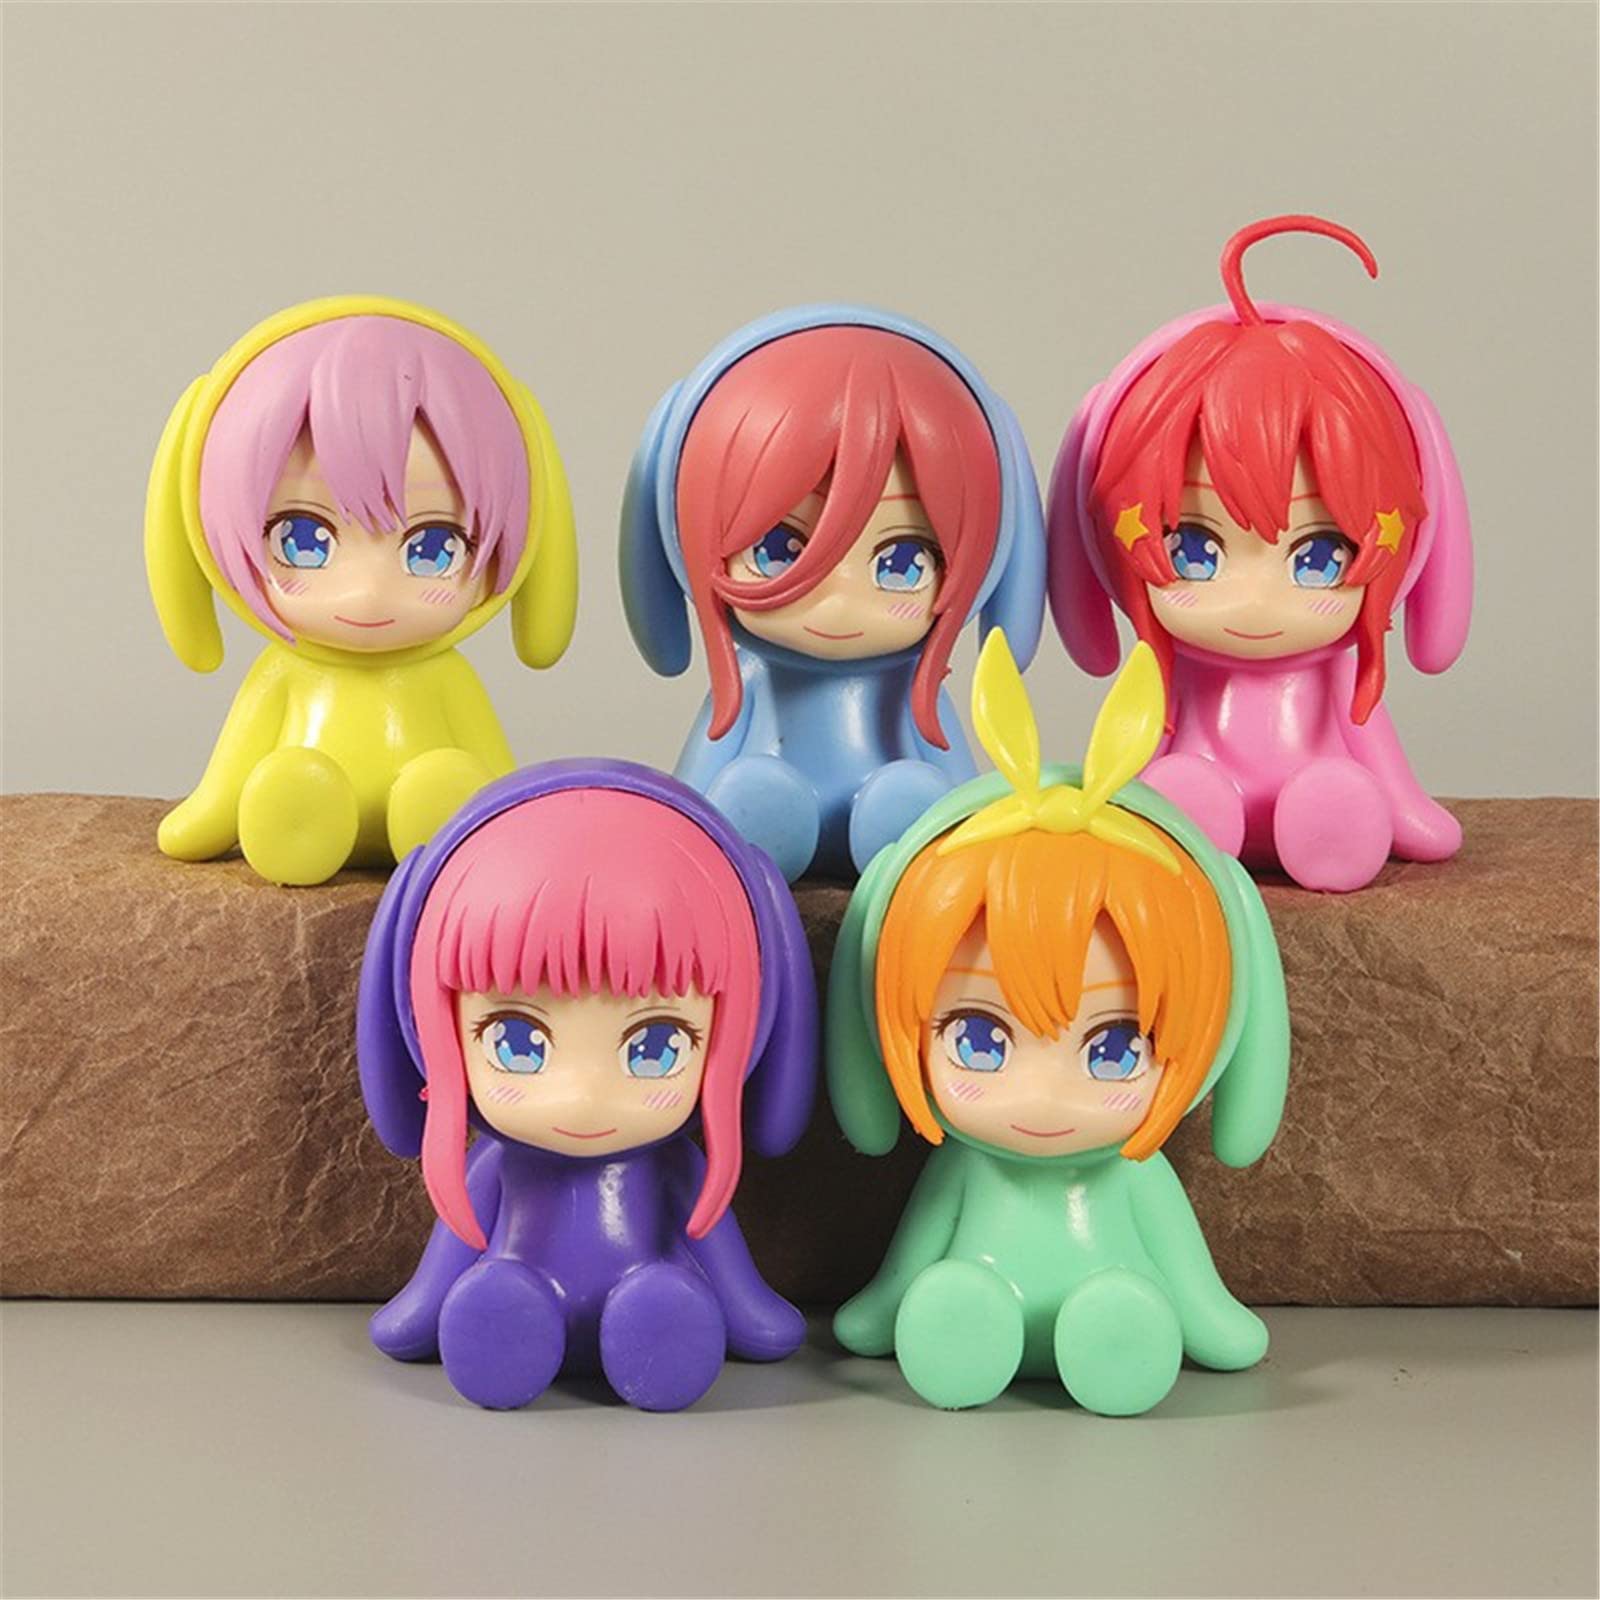 Mua The Quintessential Quintuplets Pack Figure Anime Cake Toppers Figurines PVC Model Dolls Q